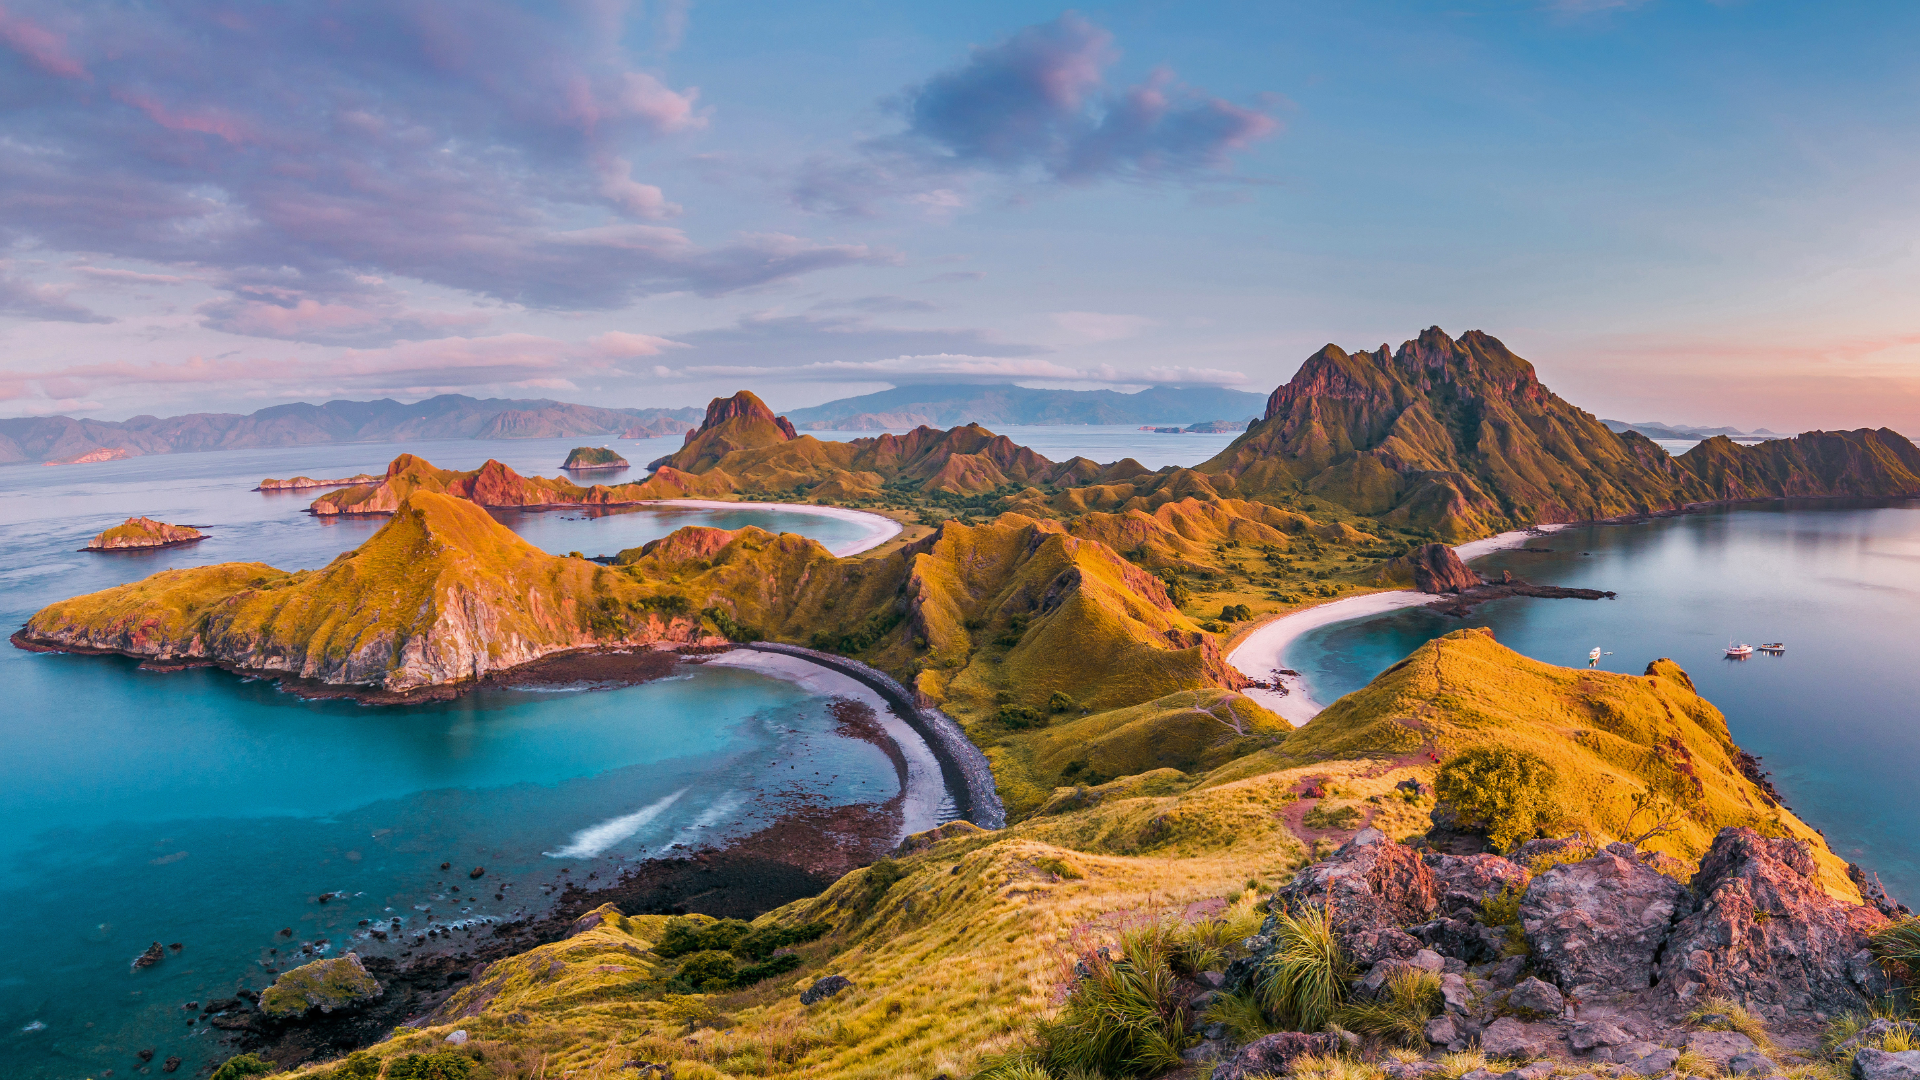 General 1920x1080 nature landscape sky clouds water mountains rocks grass plants boat far view Komodo National Park Indonesia Bali